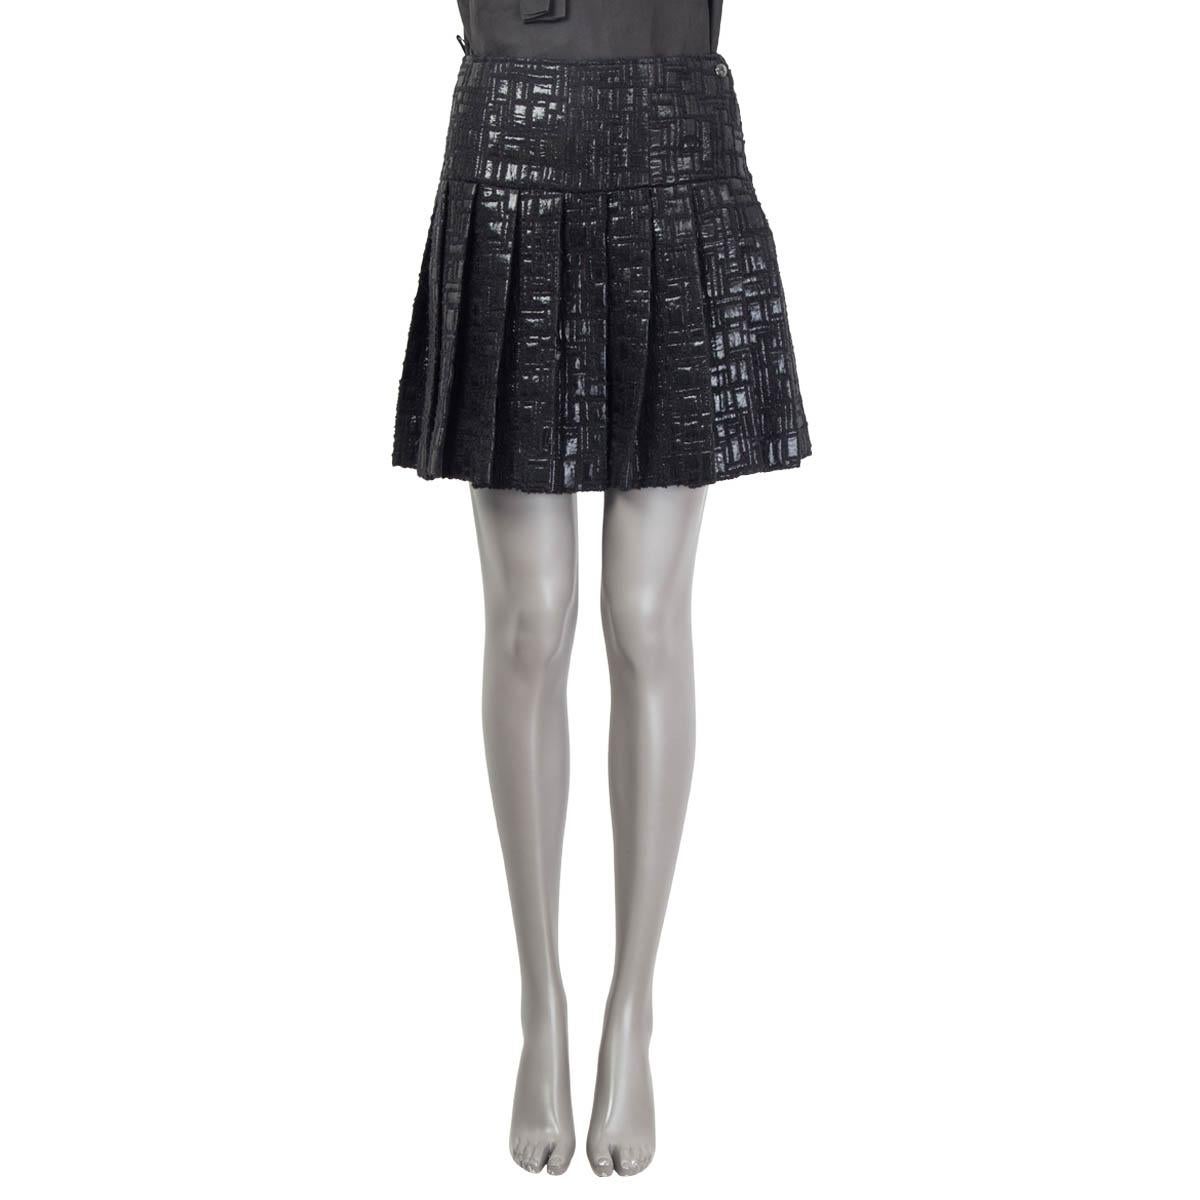 100% authentic Chanel Fall 2013 pleated textured a-line skirt in black acrylic (39%), nylon (29%), wool (26%), polyester (5%) and silk (1%). Features a small 'CC' emblem at front. Opens with a concealed zipper and a hook at the side. Lined in black